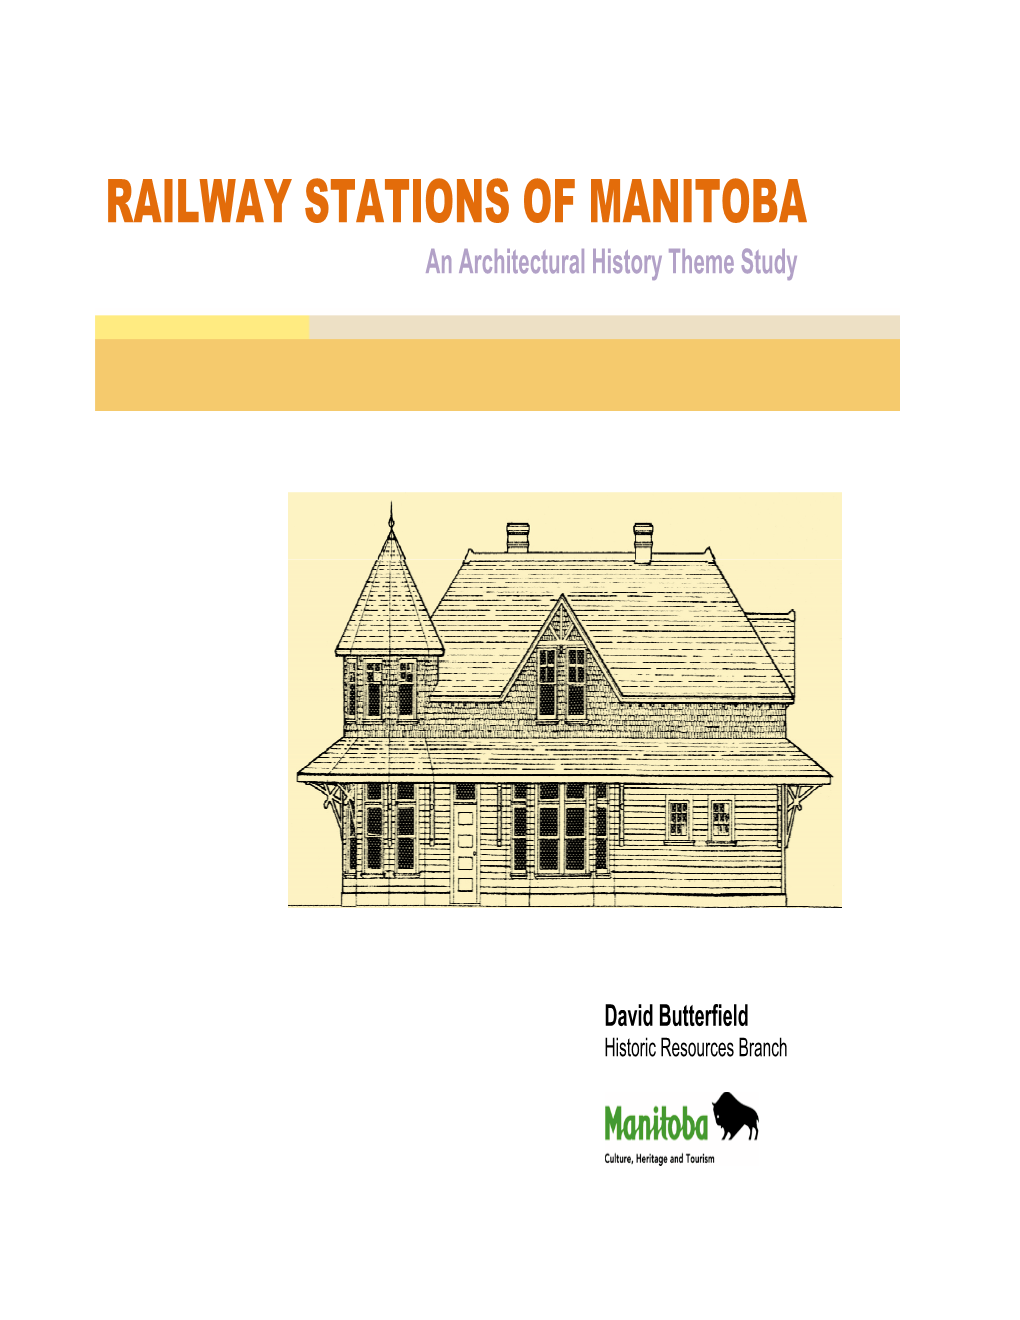 RAILWAY STATIONS of MANITOBA an Architectural History Theme Study